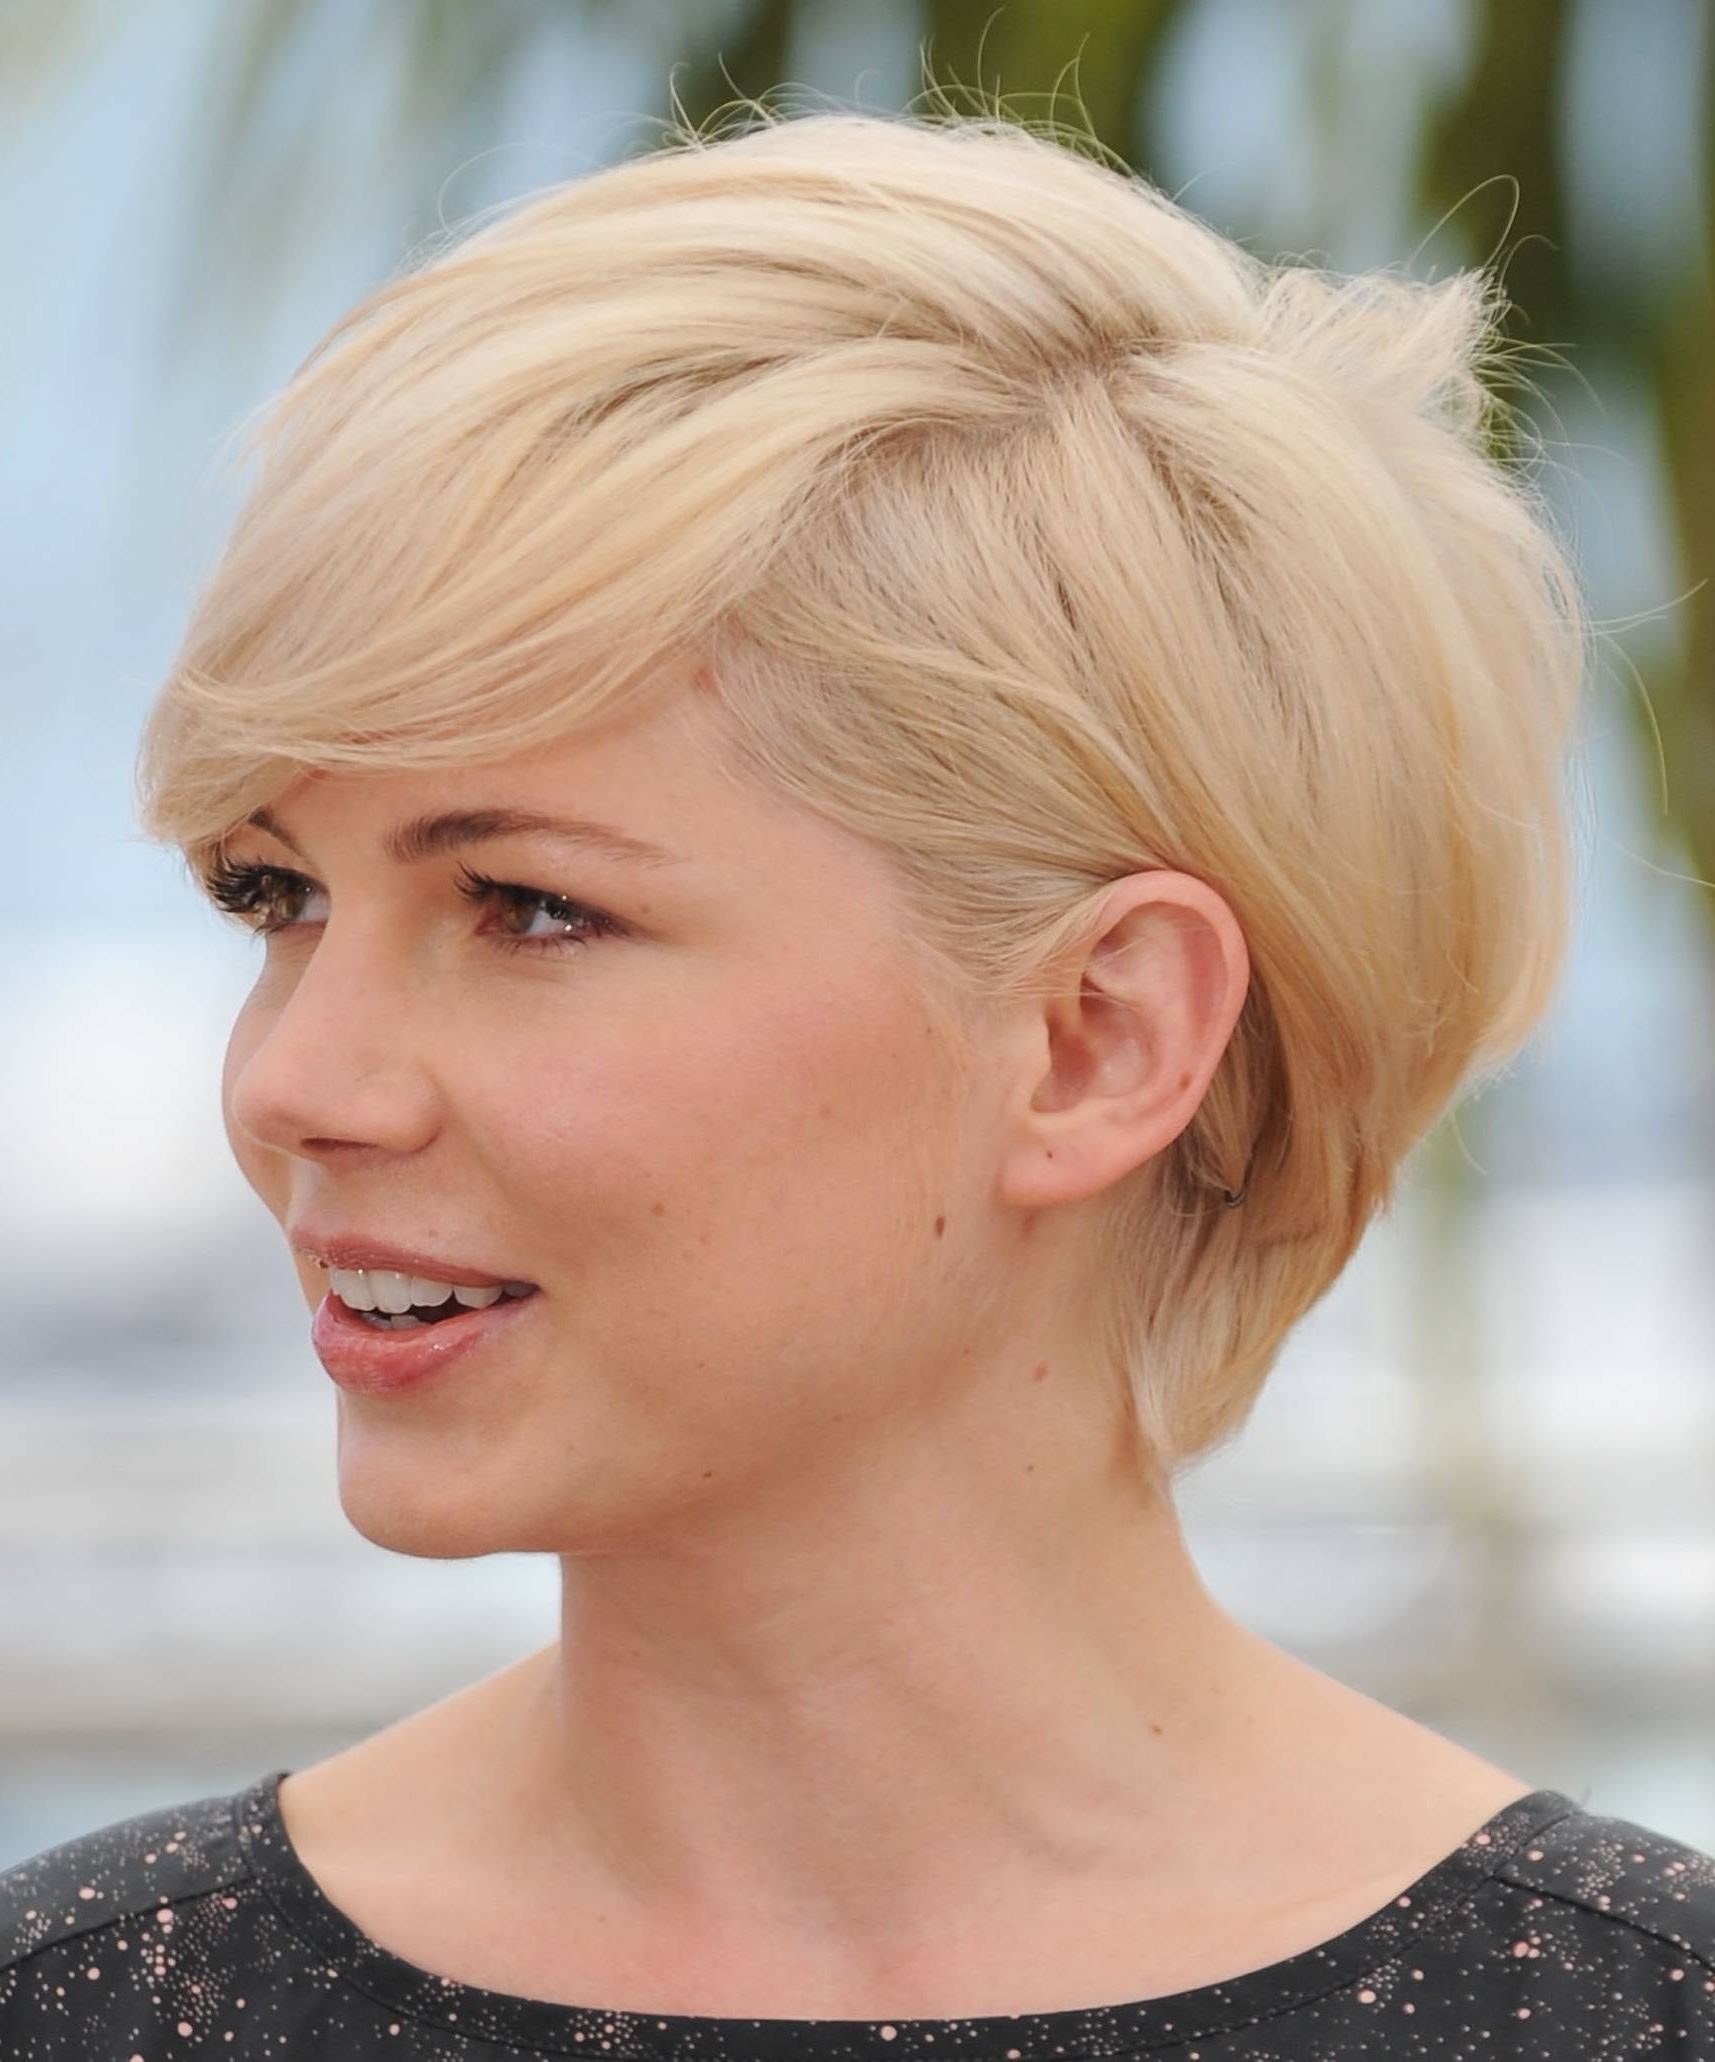 The Blonde Short Hairstyles Are Mostly Wornprettiest Celebrities Within Short Haircuts For Celebrities (View 7 of 25)